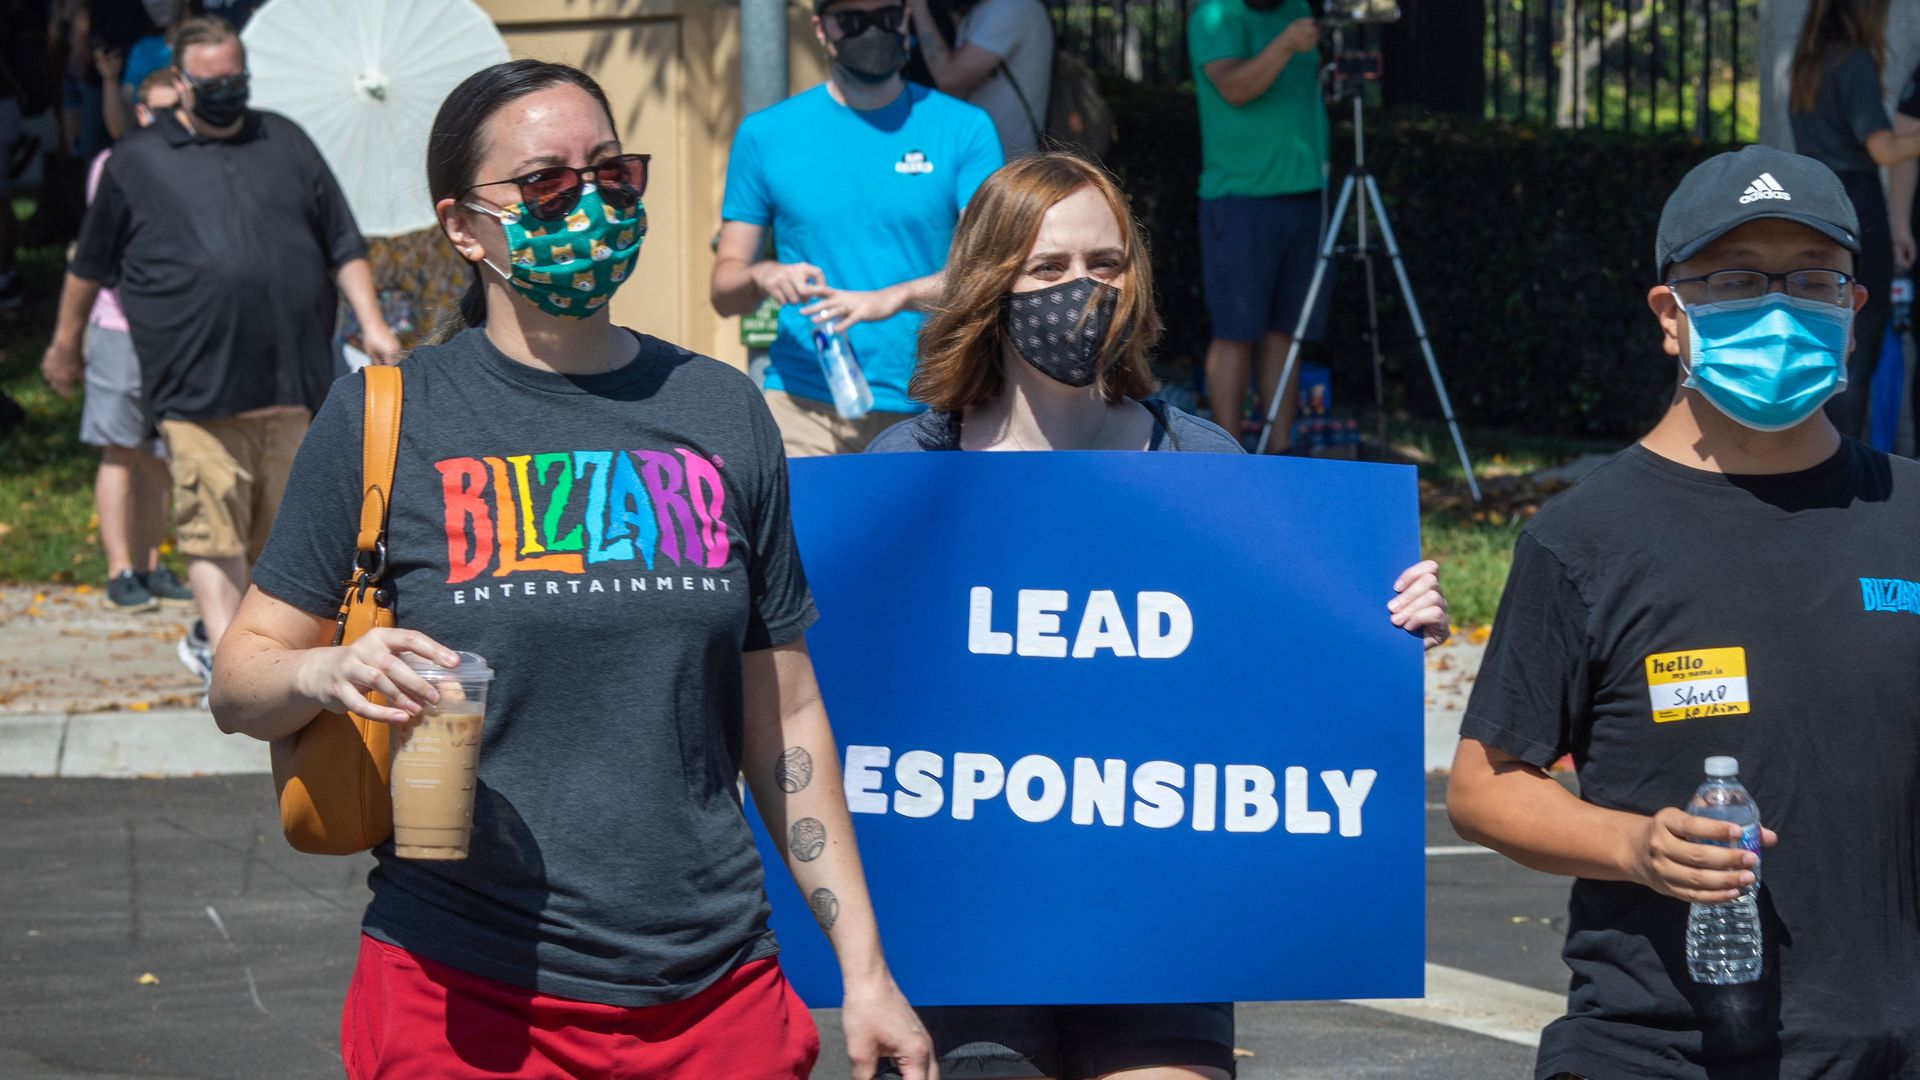 Photo of women protesting. One wears a shirt with the Blizzard logo on it. The other holds a sign that says "Lead Responsibly"